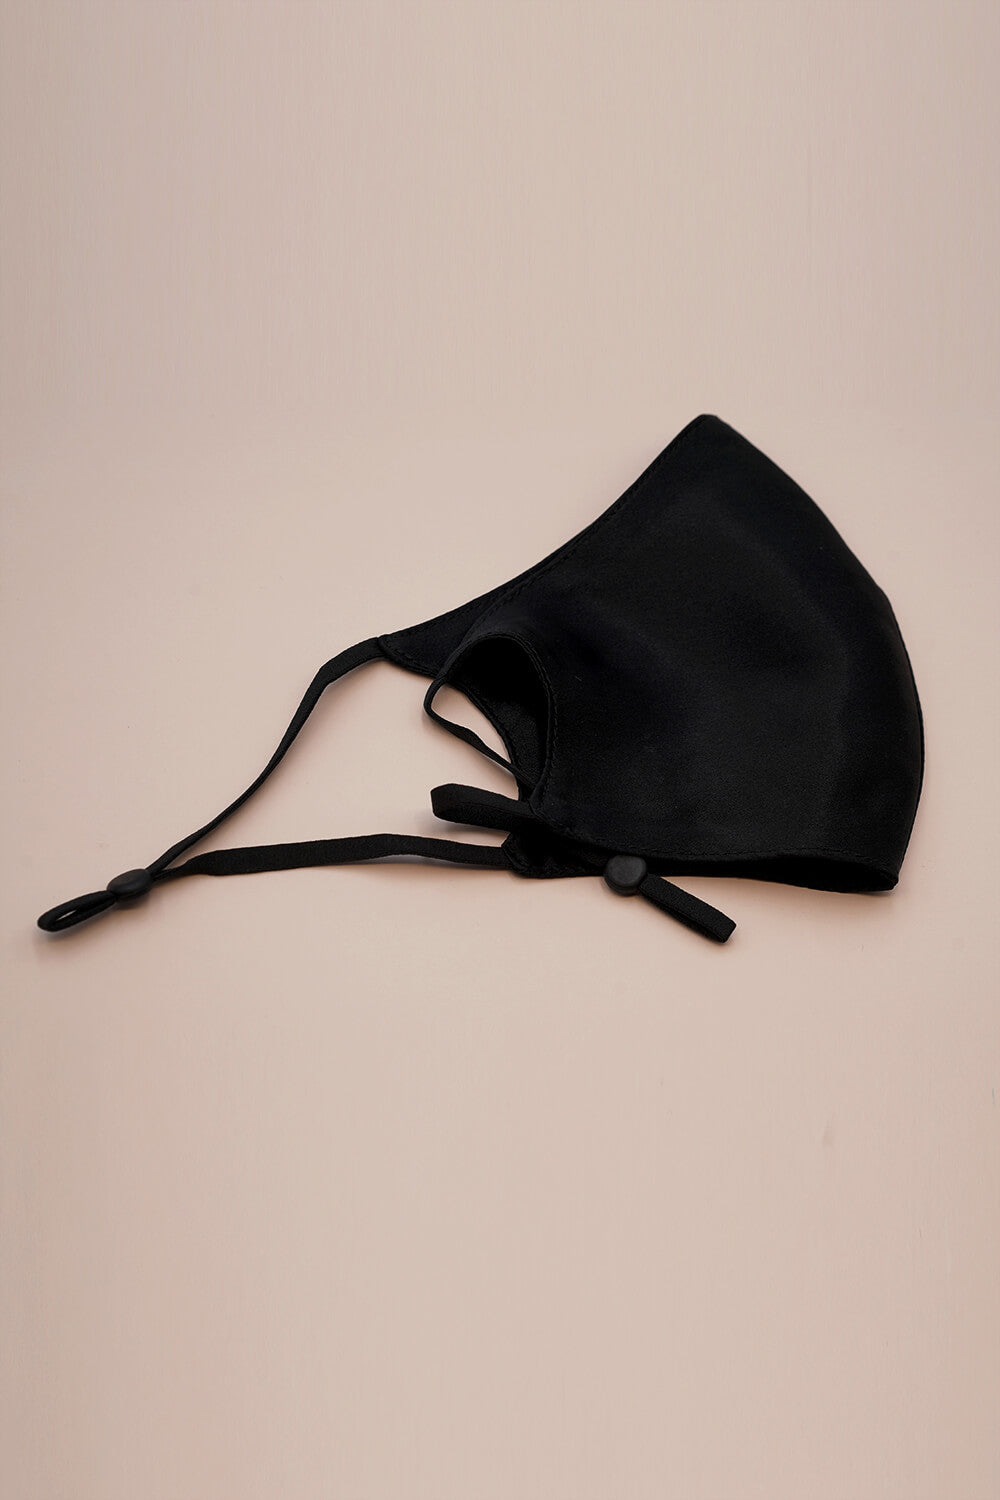 STELLAR Silk Face Cover - Black (No filter pocket. No nose wire) - BASK ™